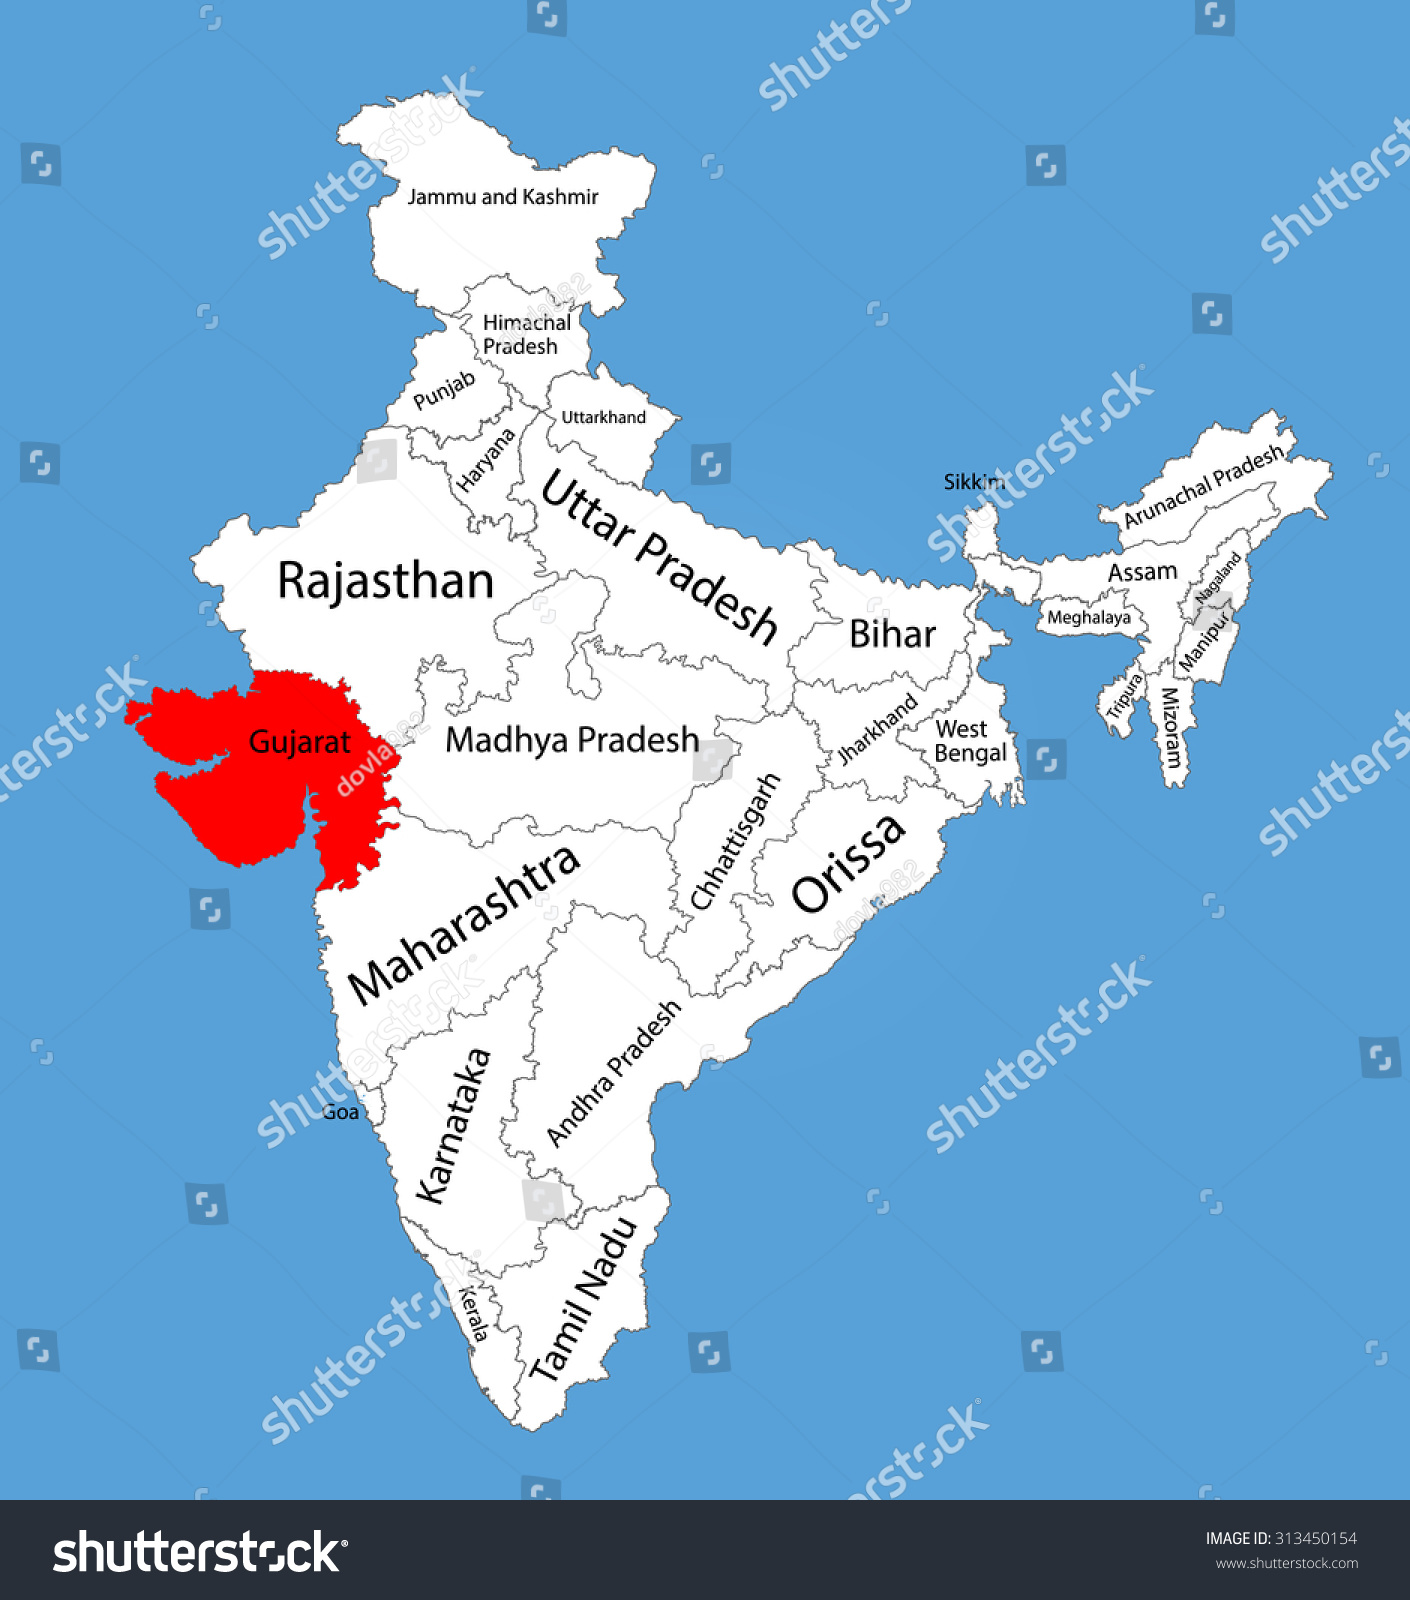 Gujrat On India Map Gujarat State, India, Vector Map Silhouette - Royalty Free Stock Vector  313450154 - Avopix.com